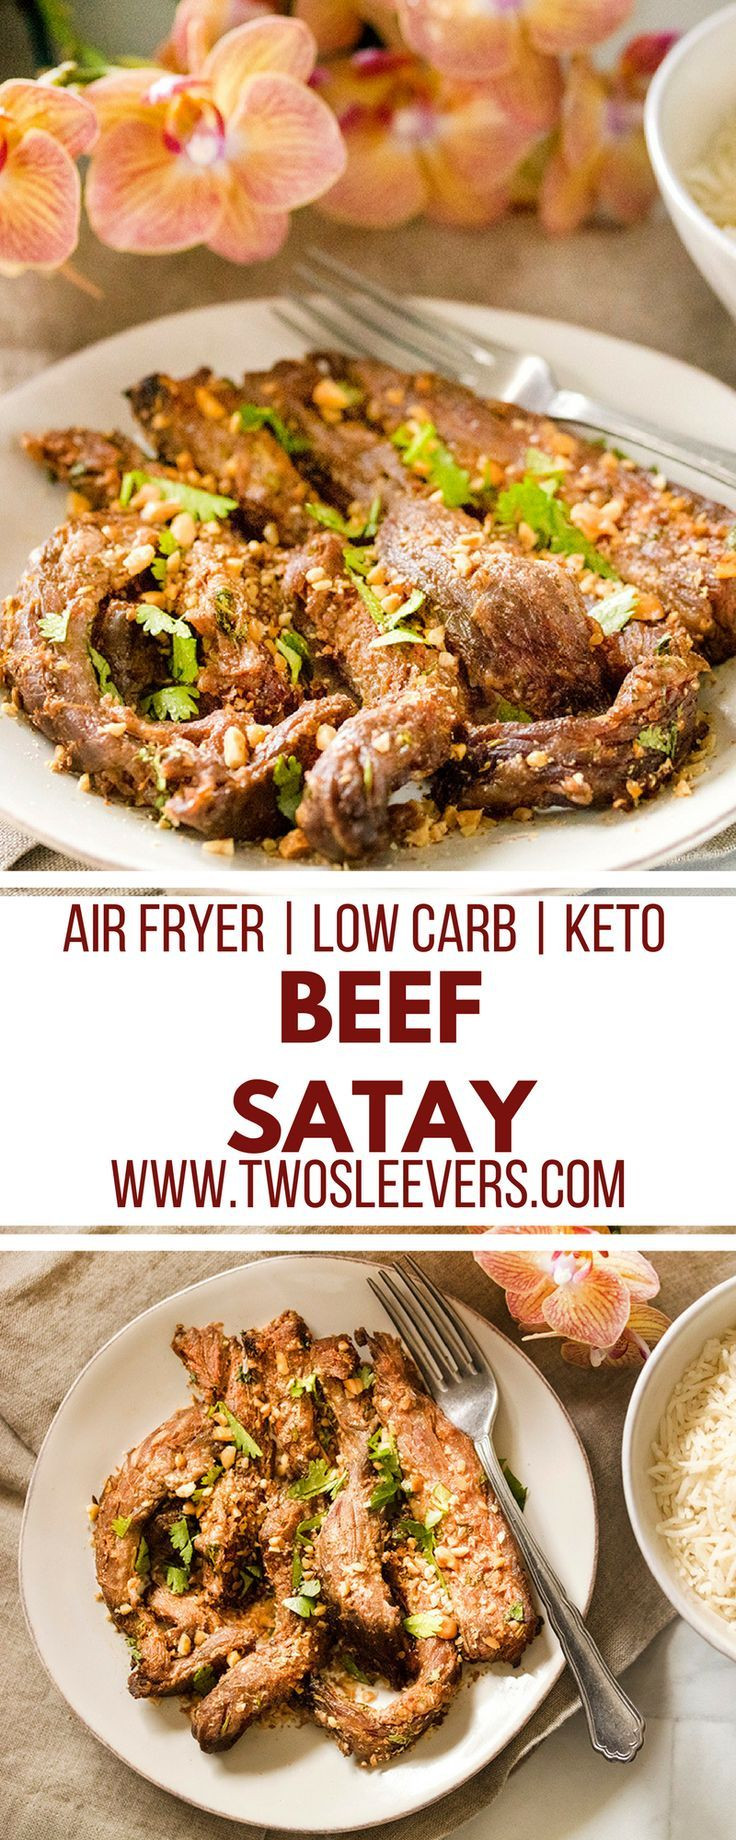 Air Fryer Low Carb Recipes
 114 best Low Carb Air Fryer Recipes images on Pinterest